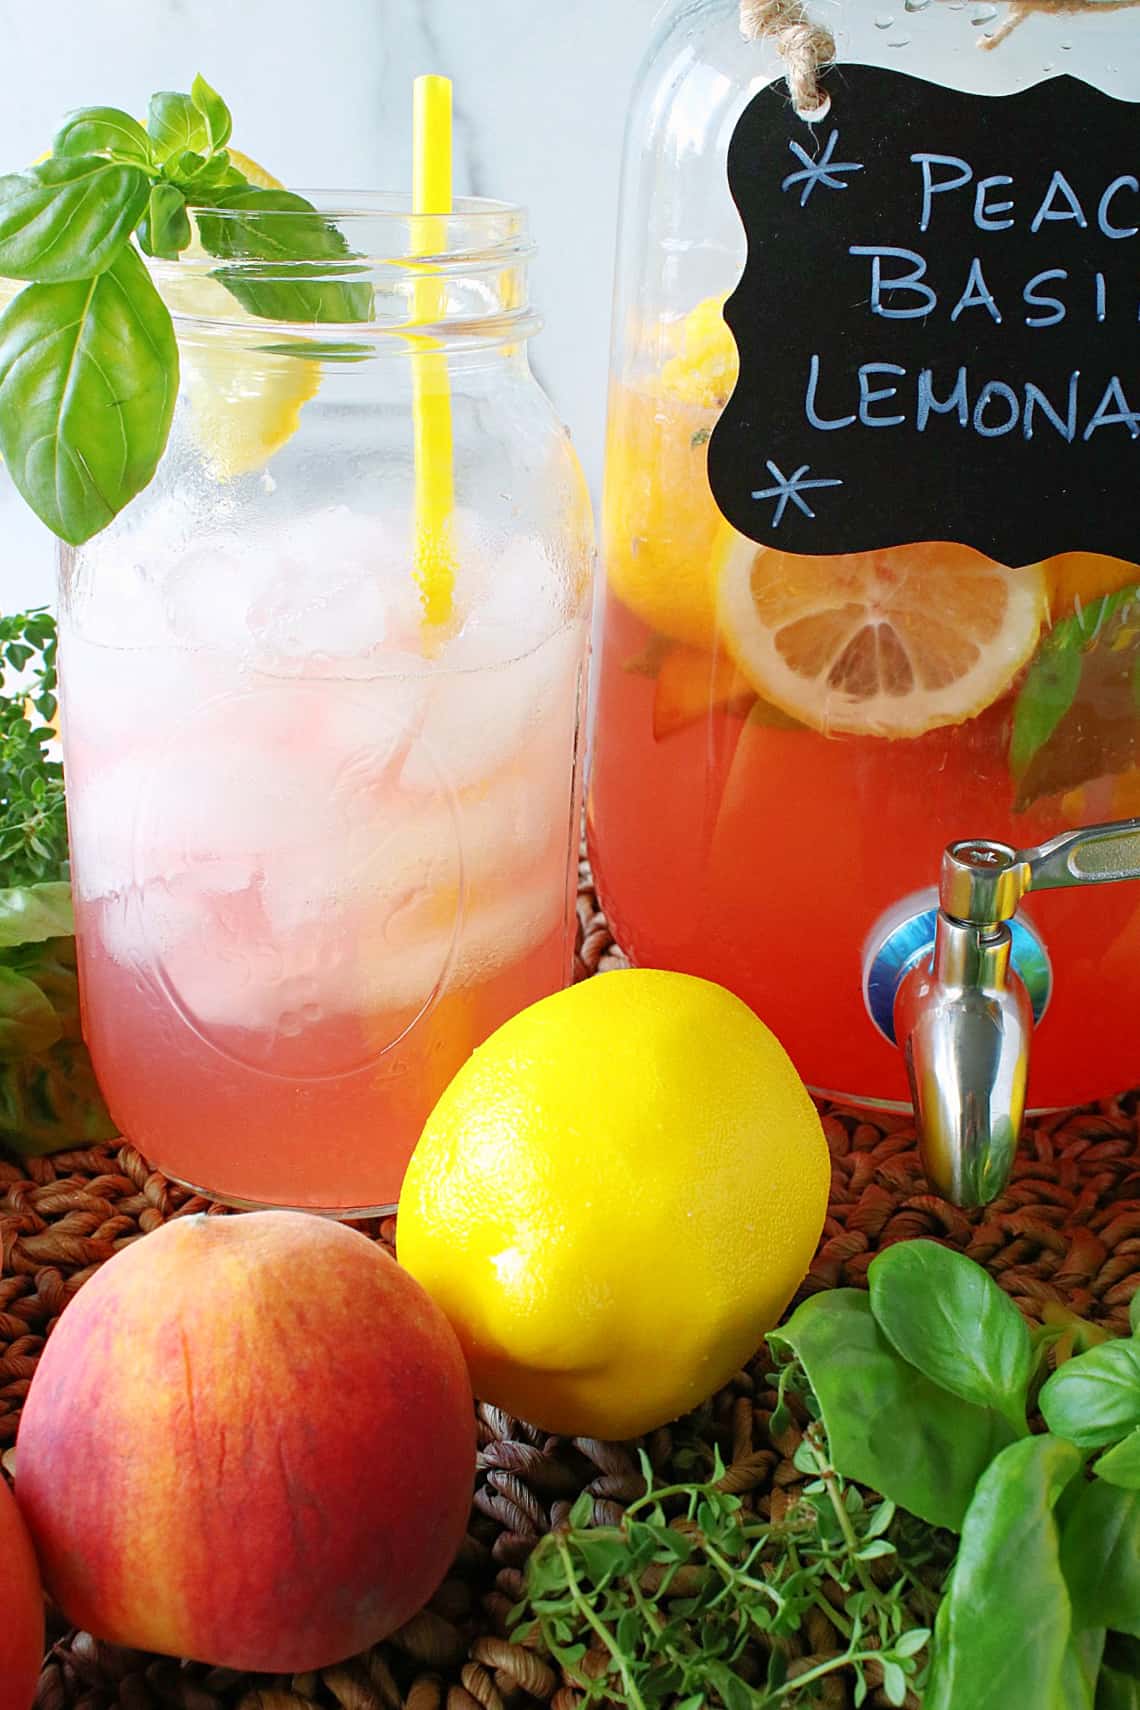 A glass mason jar with ice and a serving of Peach Basil Lemonade with a straw, lemon slice and fresh basil.